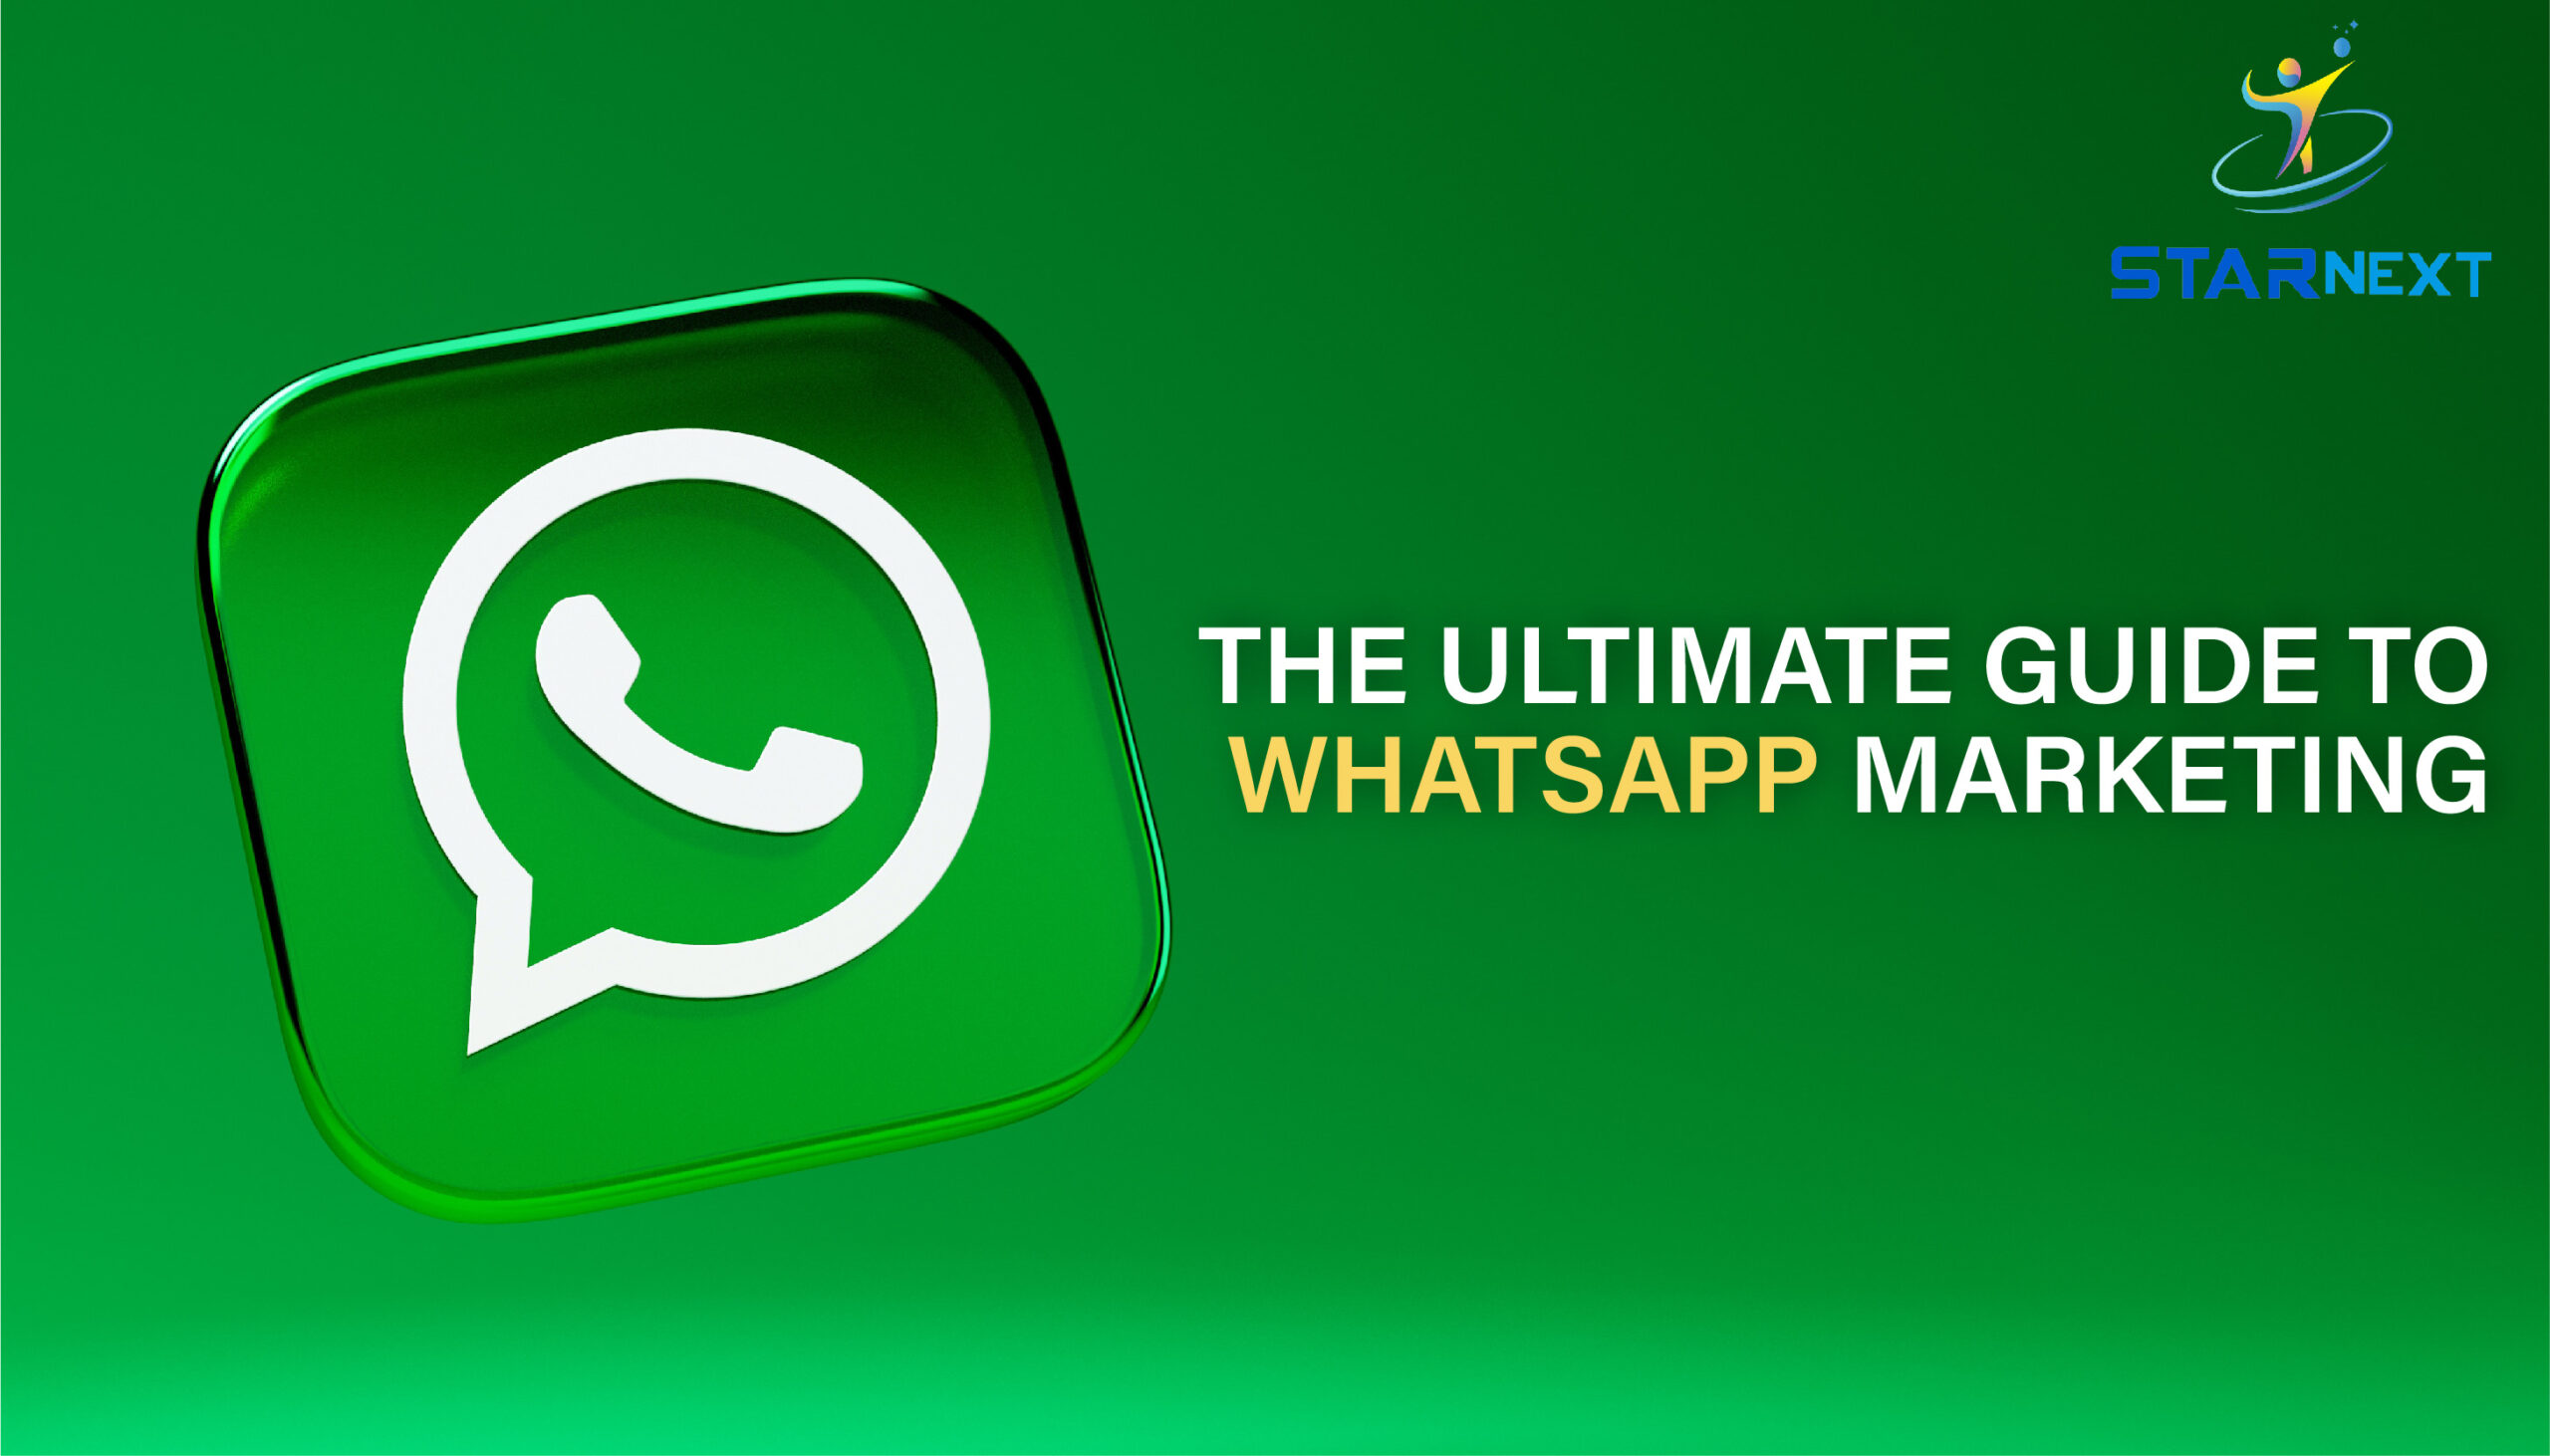 The Ultimate Guide To WhatsApp Marketing